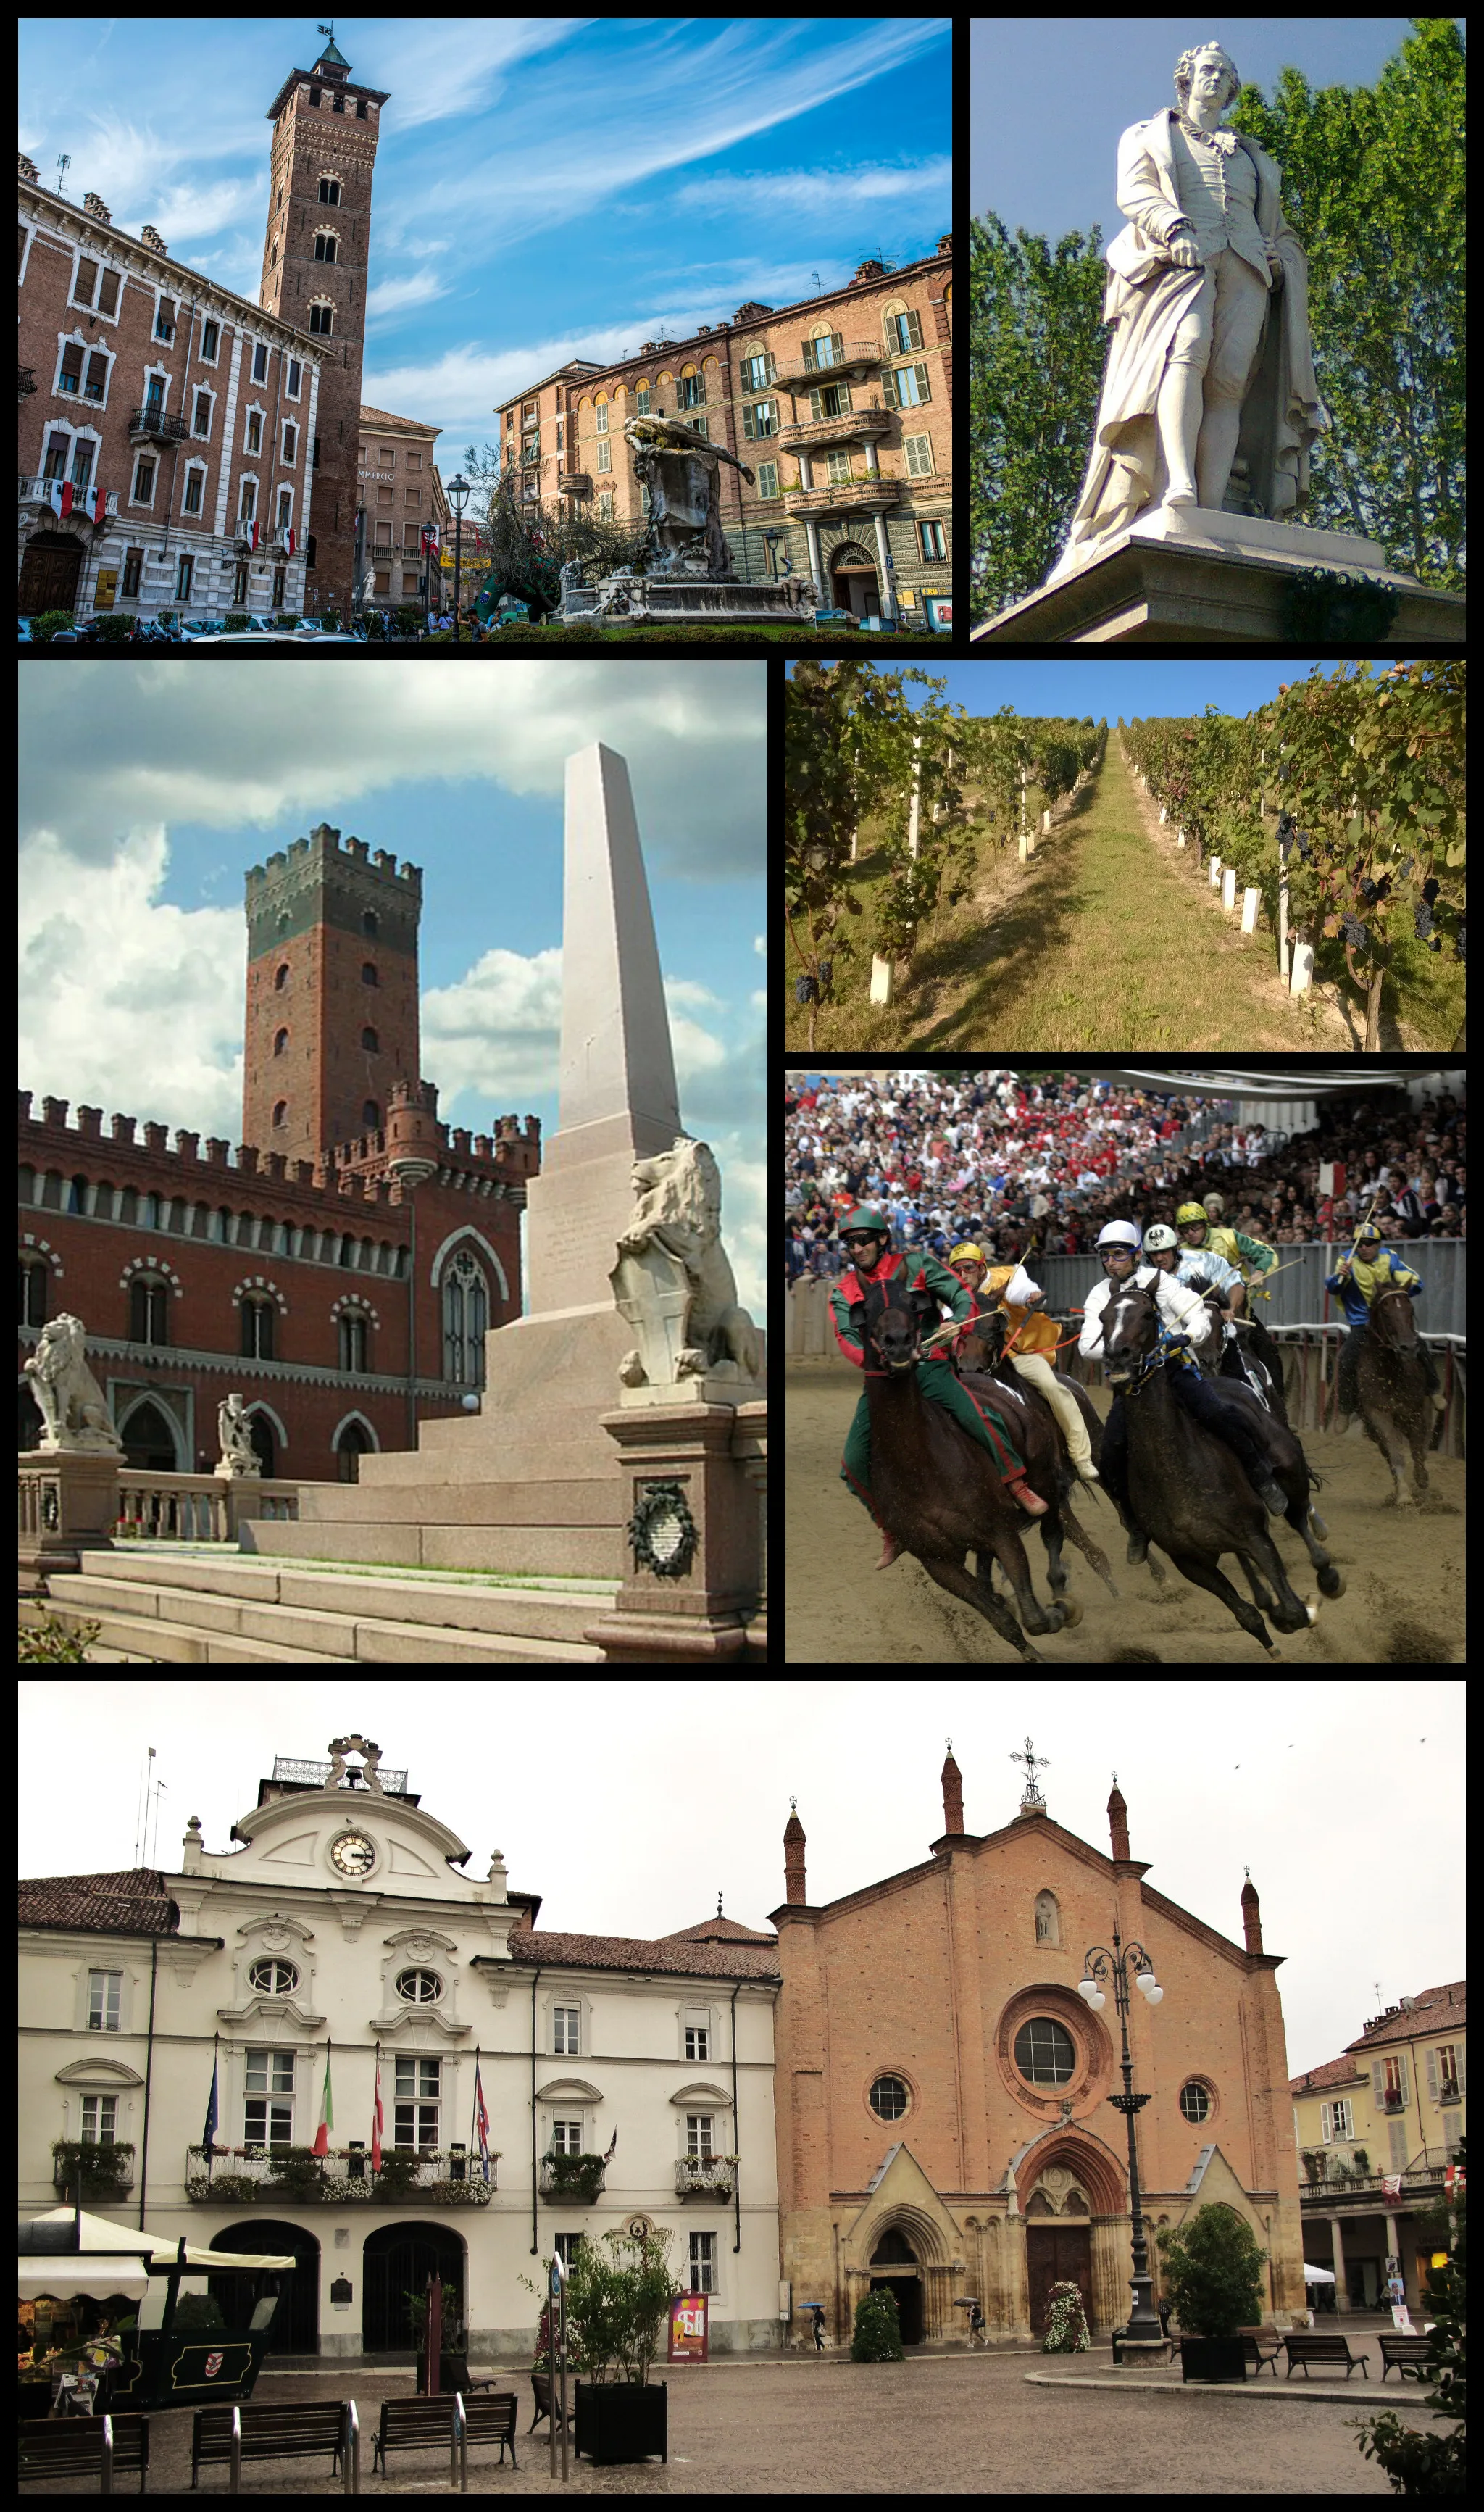 Photo showing: Mosaic of pictures of Asti. From top and left: Piazza Medici (Medici Square) and Troyana Tower; a monument of Vittorio Alfieri in Piazza Alfieri (Alfieri Square); Piazza Roma (Rome Square) and Comentina Tower; vineyards near Asti; the Palio di Asti; town hall and San Secondo church in Piazza San Secondo (San Secondo Square).